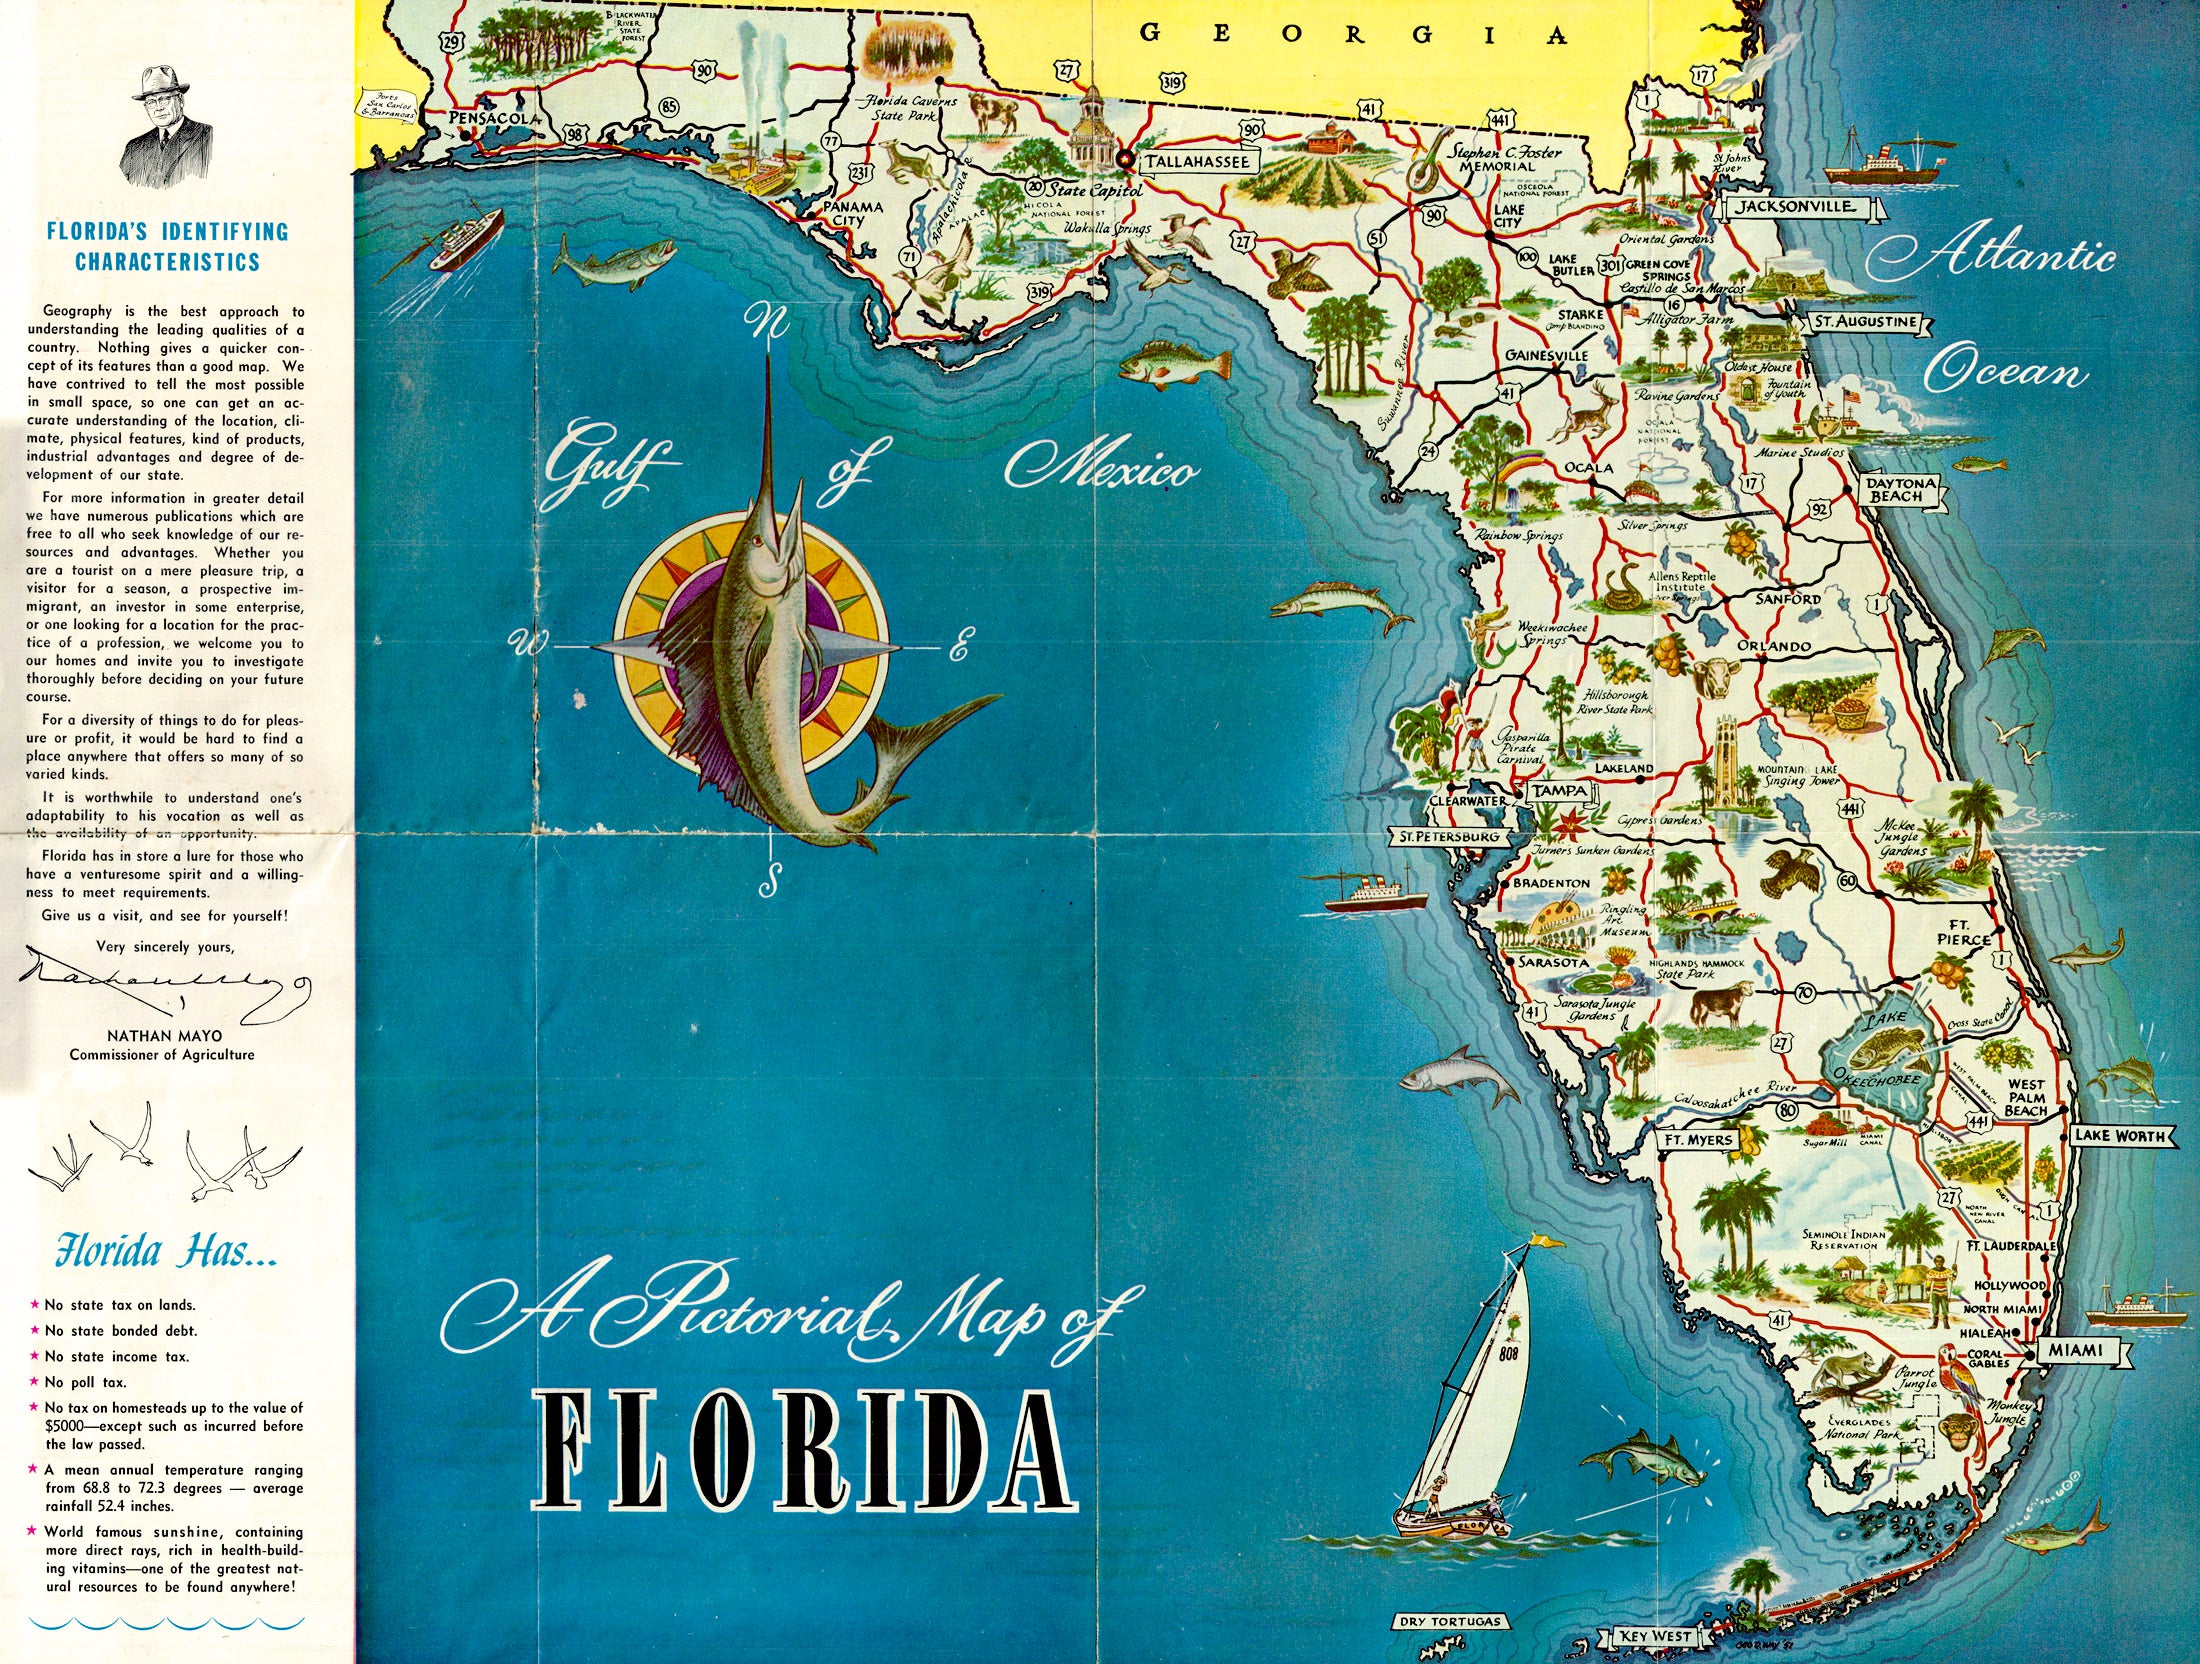 (FL.) A Pictorial Map of Florida